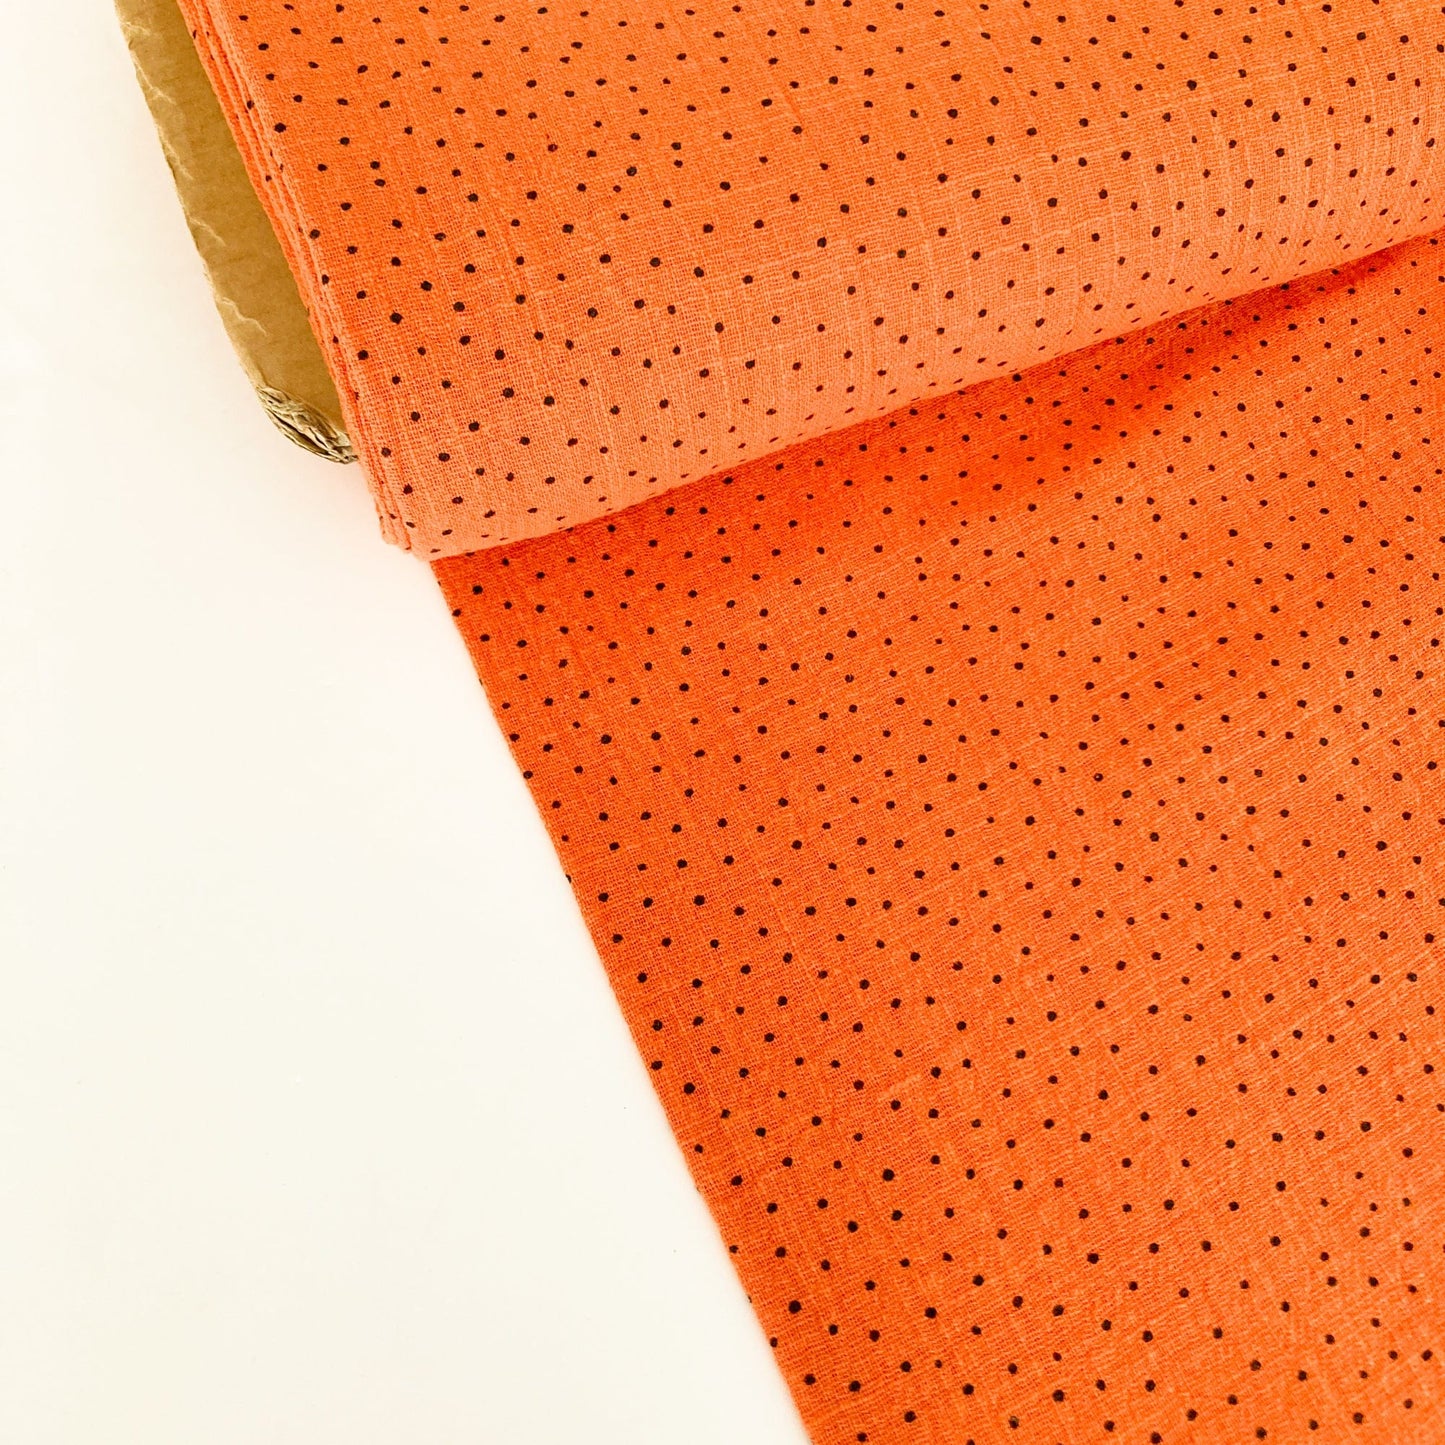 Cotton Cheescloth in Tangerine with Black Spots